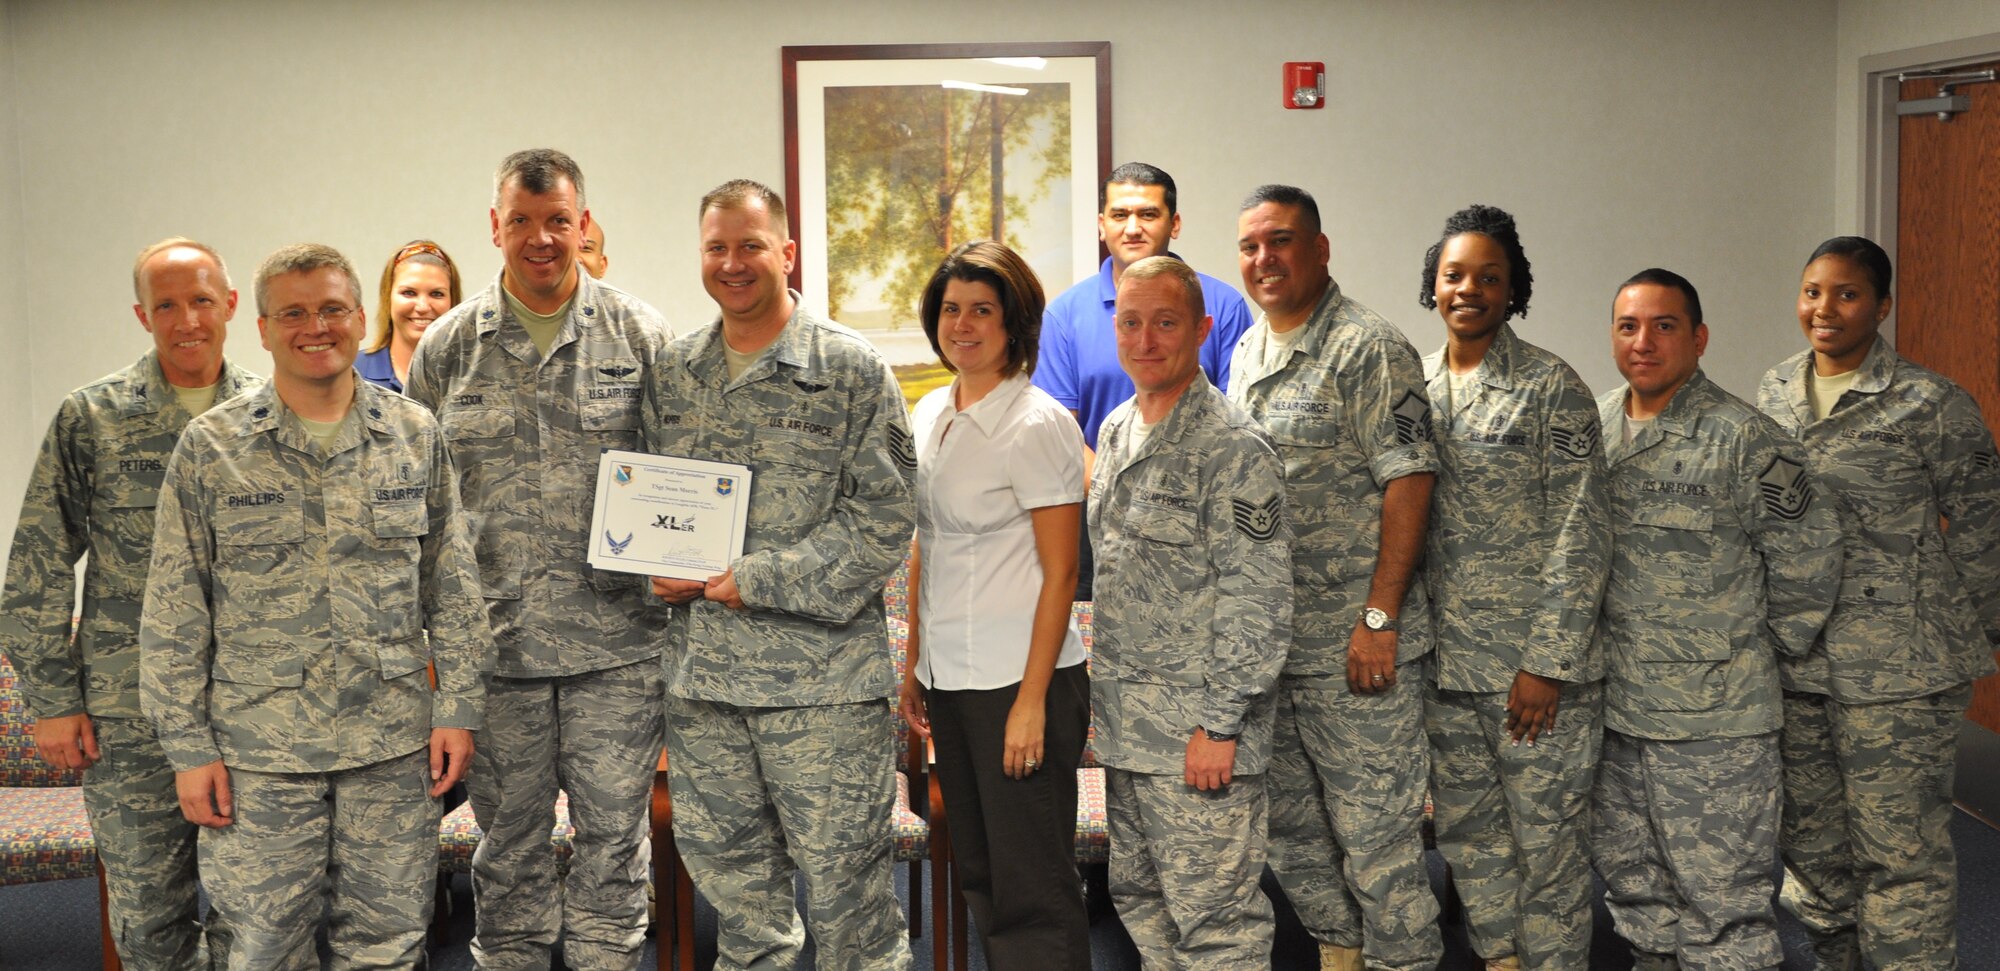 LAUGHLIN AIR FORCE BASE, Texas –Tech. Sgt. Sean Morris, 47th Medical Operations Squadron , poses with fellow members of his squadron after being presented the XLer of the Week award by Col. David Ellis, 47th Flying Training Wing vice commander, June 16. The XLer is a weekly award chosen by 47th FTW leadership and given to individuals who consistently make outstanding contributions to Laughlin and their unit. (U.S. Air Force photo by Airman 1st Class Blake Mize)